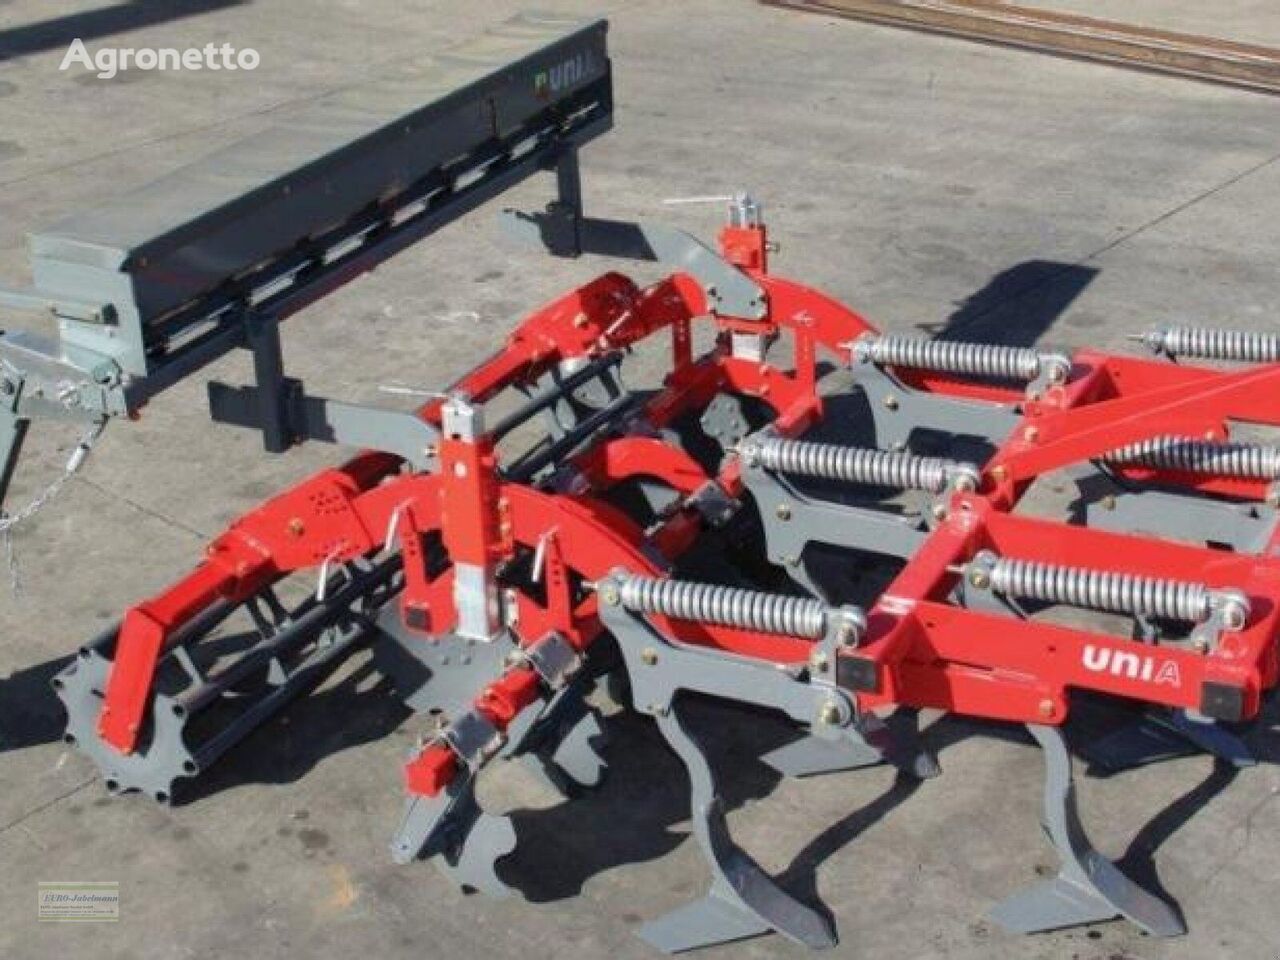 new Unia mechanical seed drill